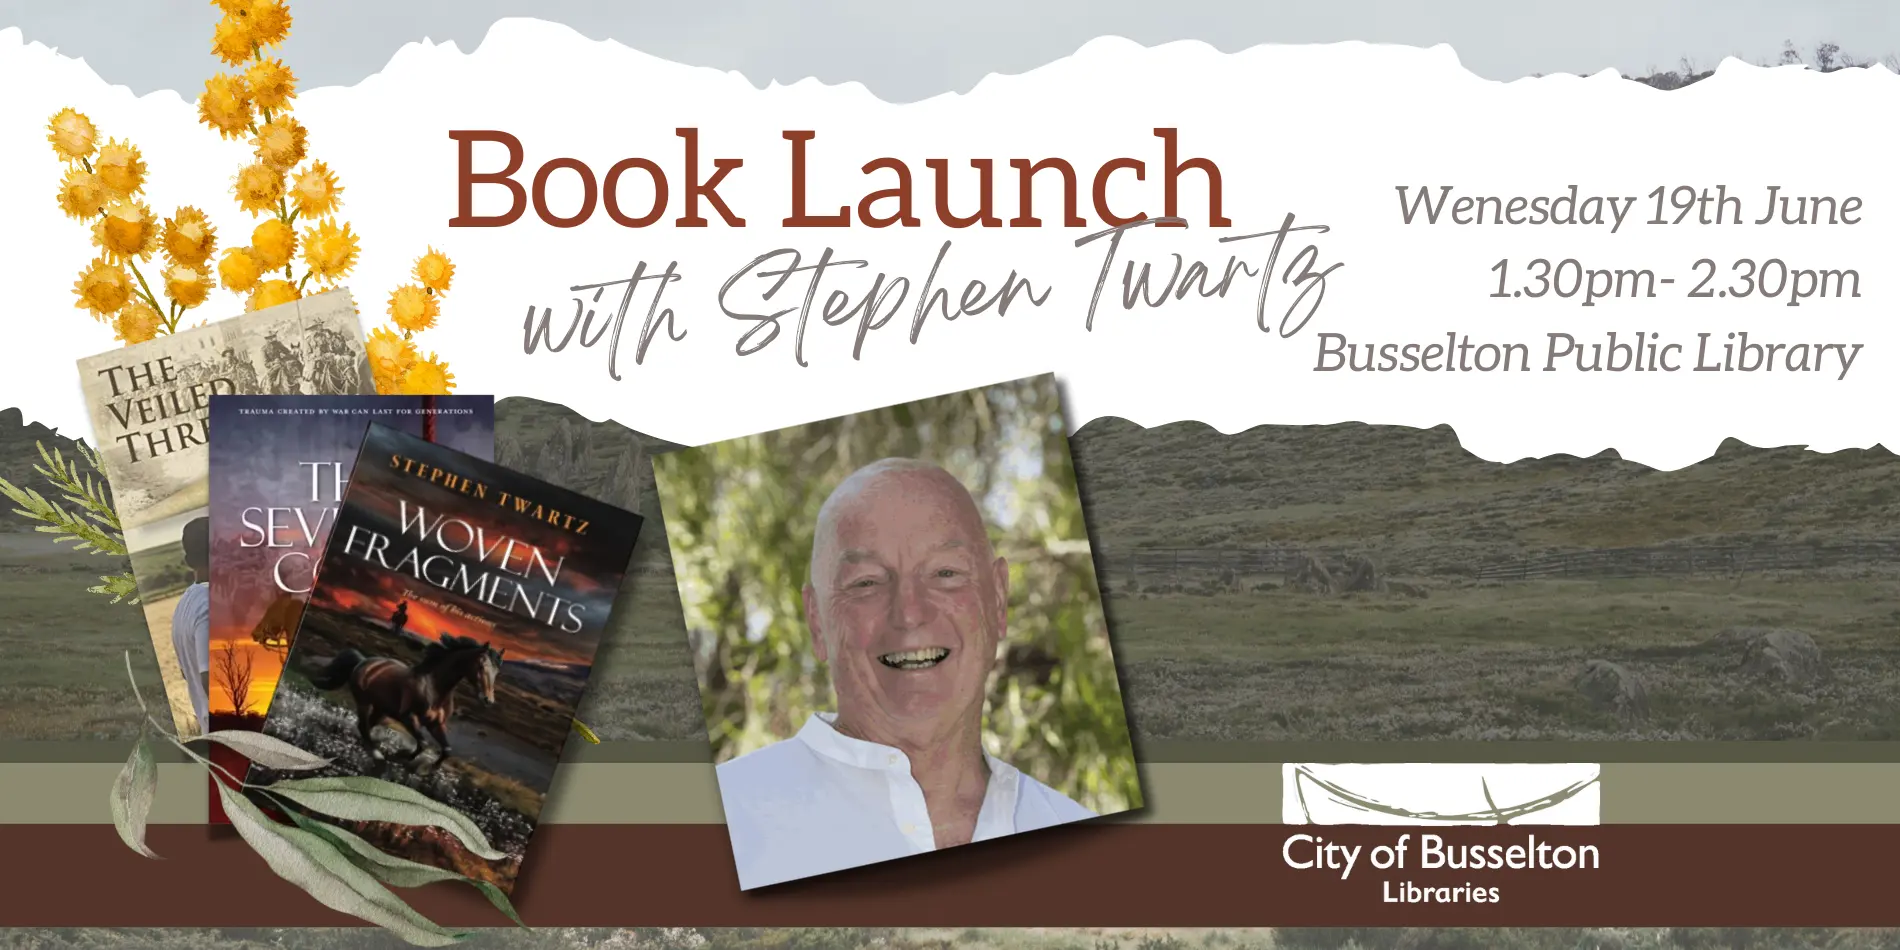 Stephen Twartz Book Launch to be held at the Busselton Library on the 19th of June 1.30pm